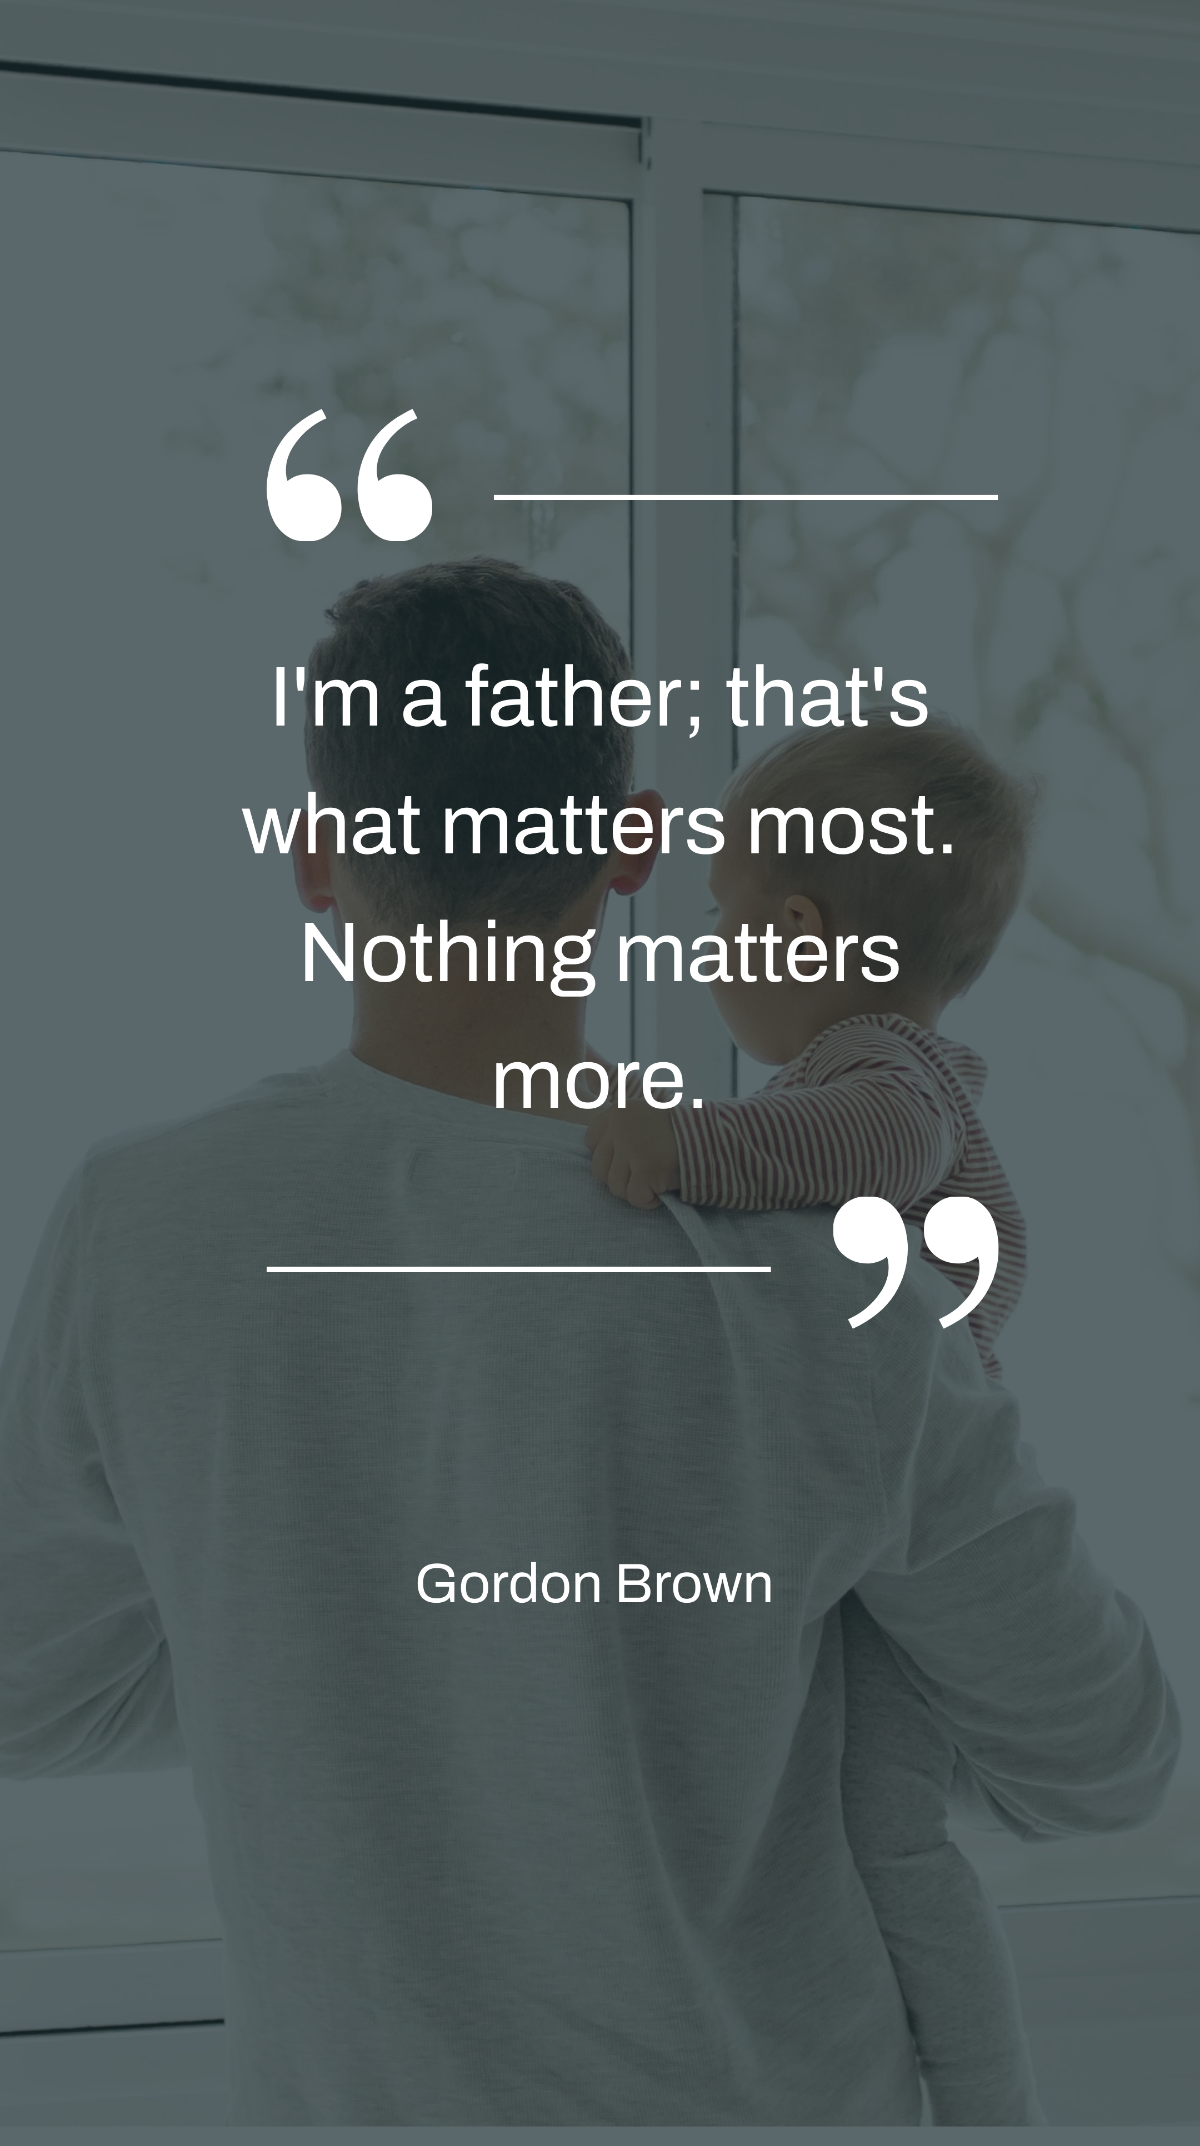 Gordon Brown - I'm a father; that's what matters most. Nothing matters more. Template